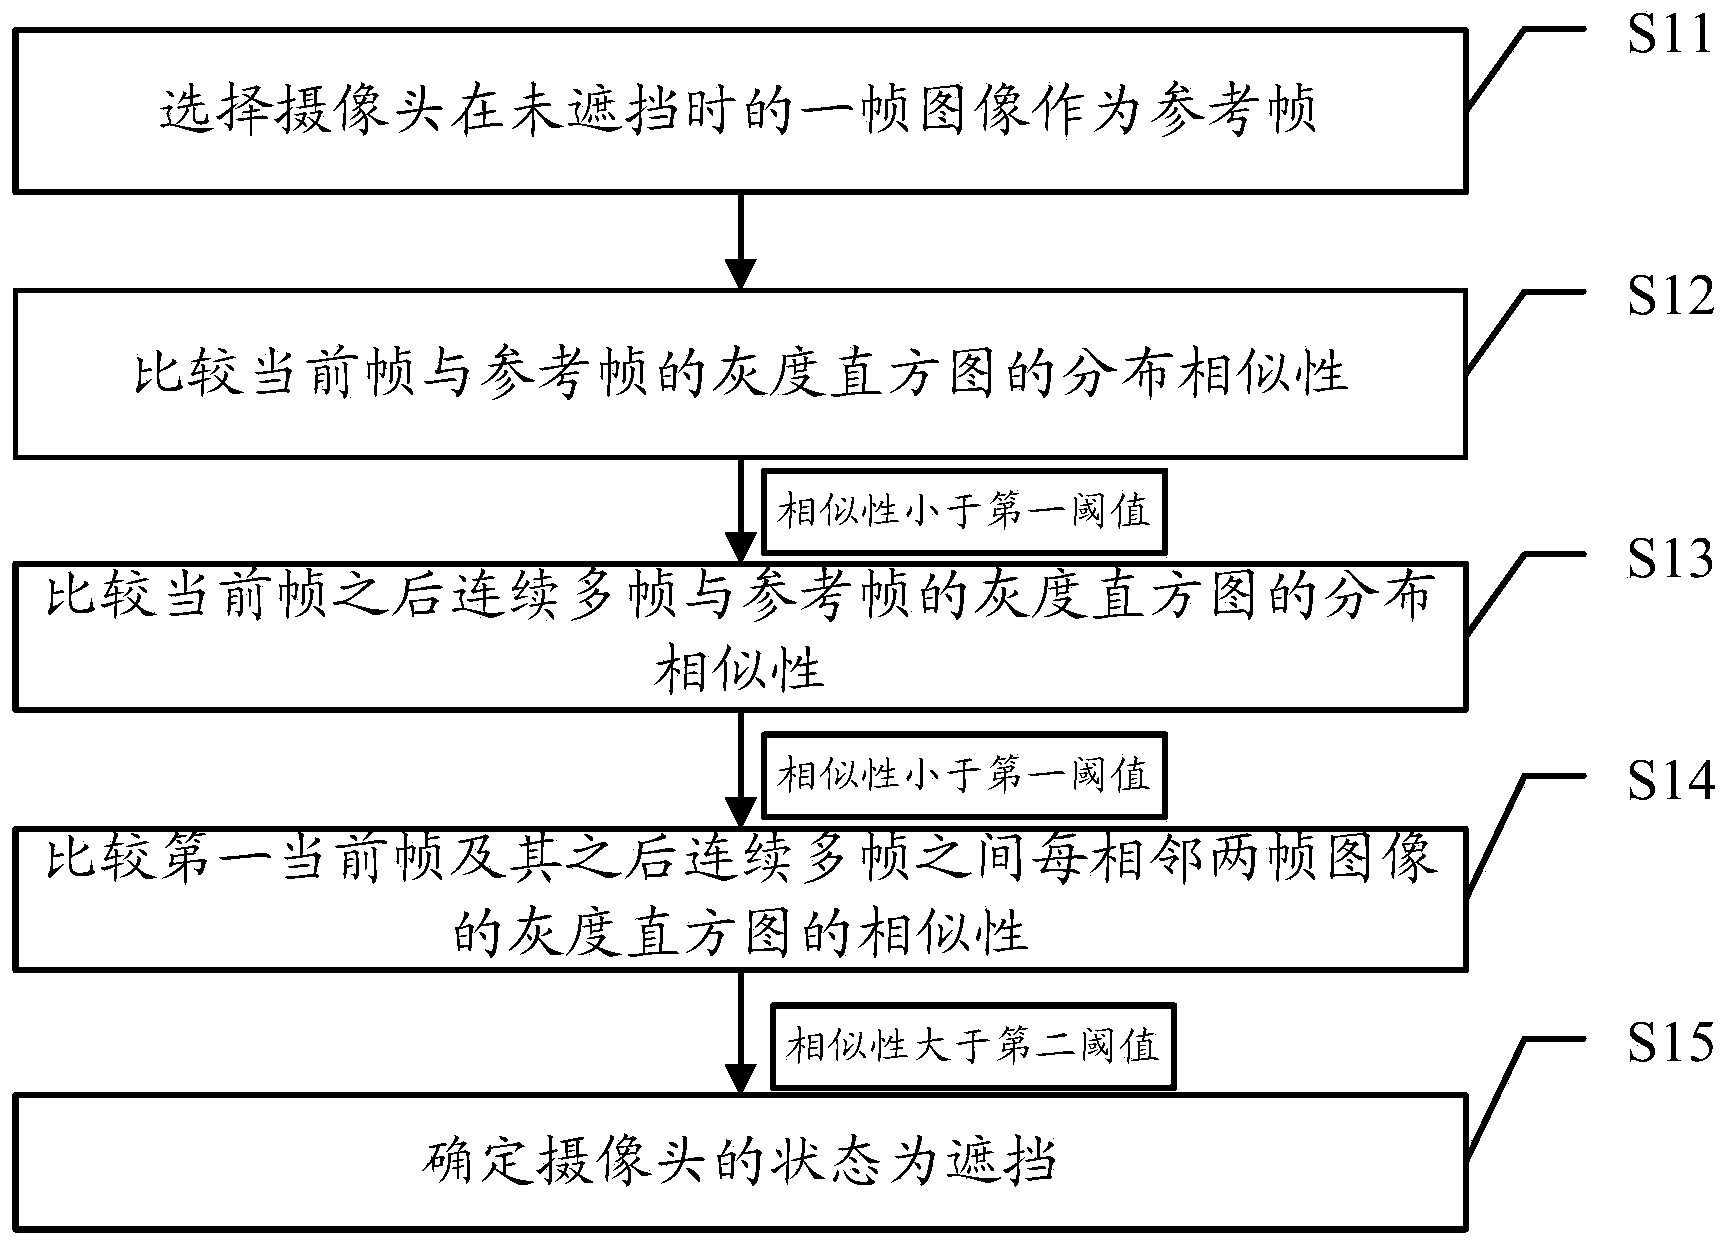 Method and system for detecting whether camera is covered or not